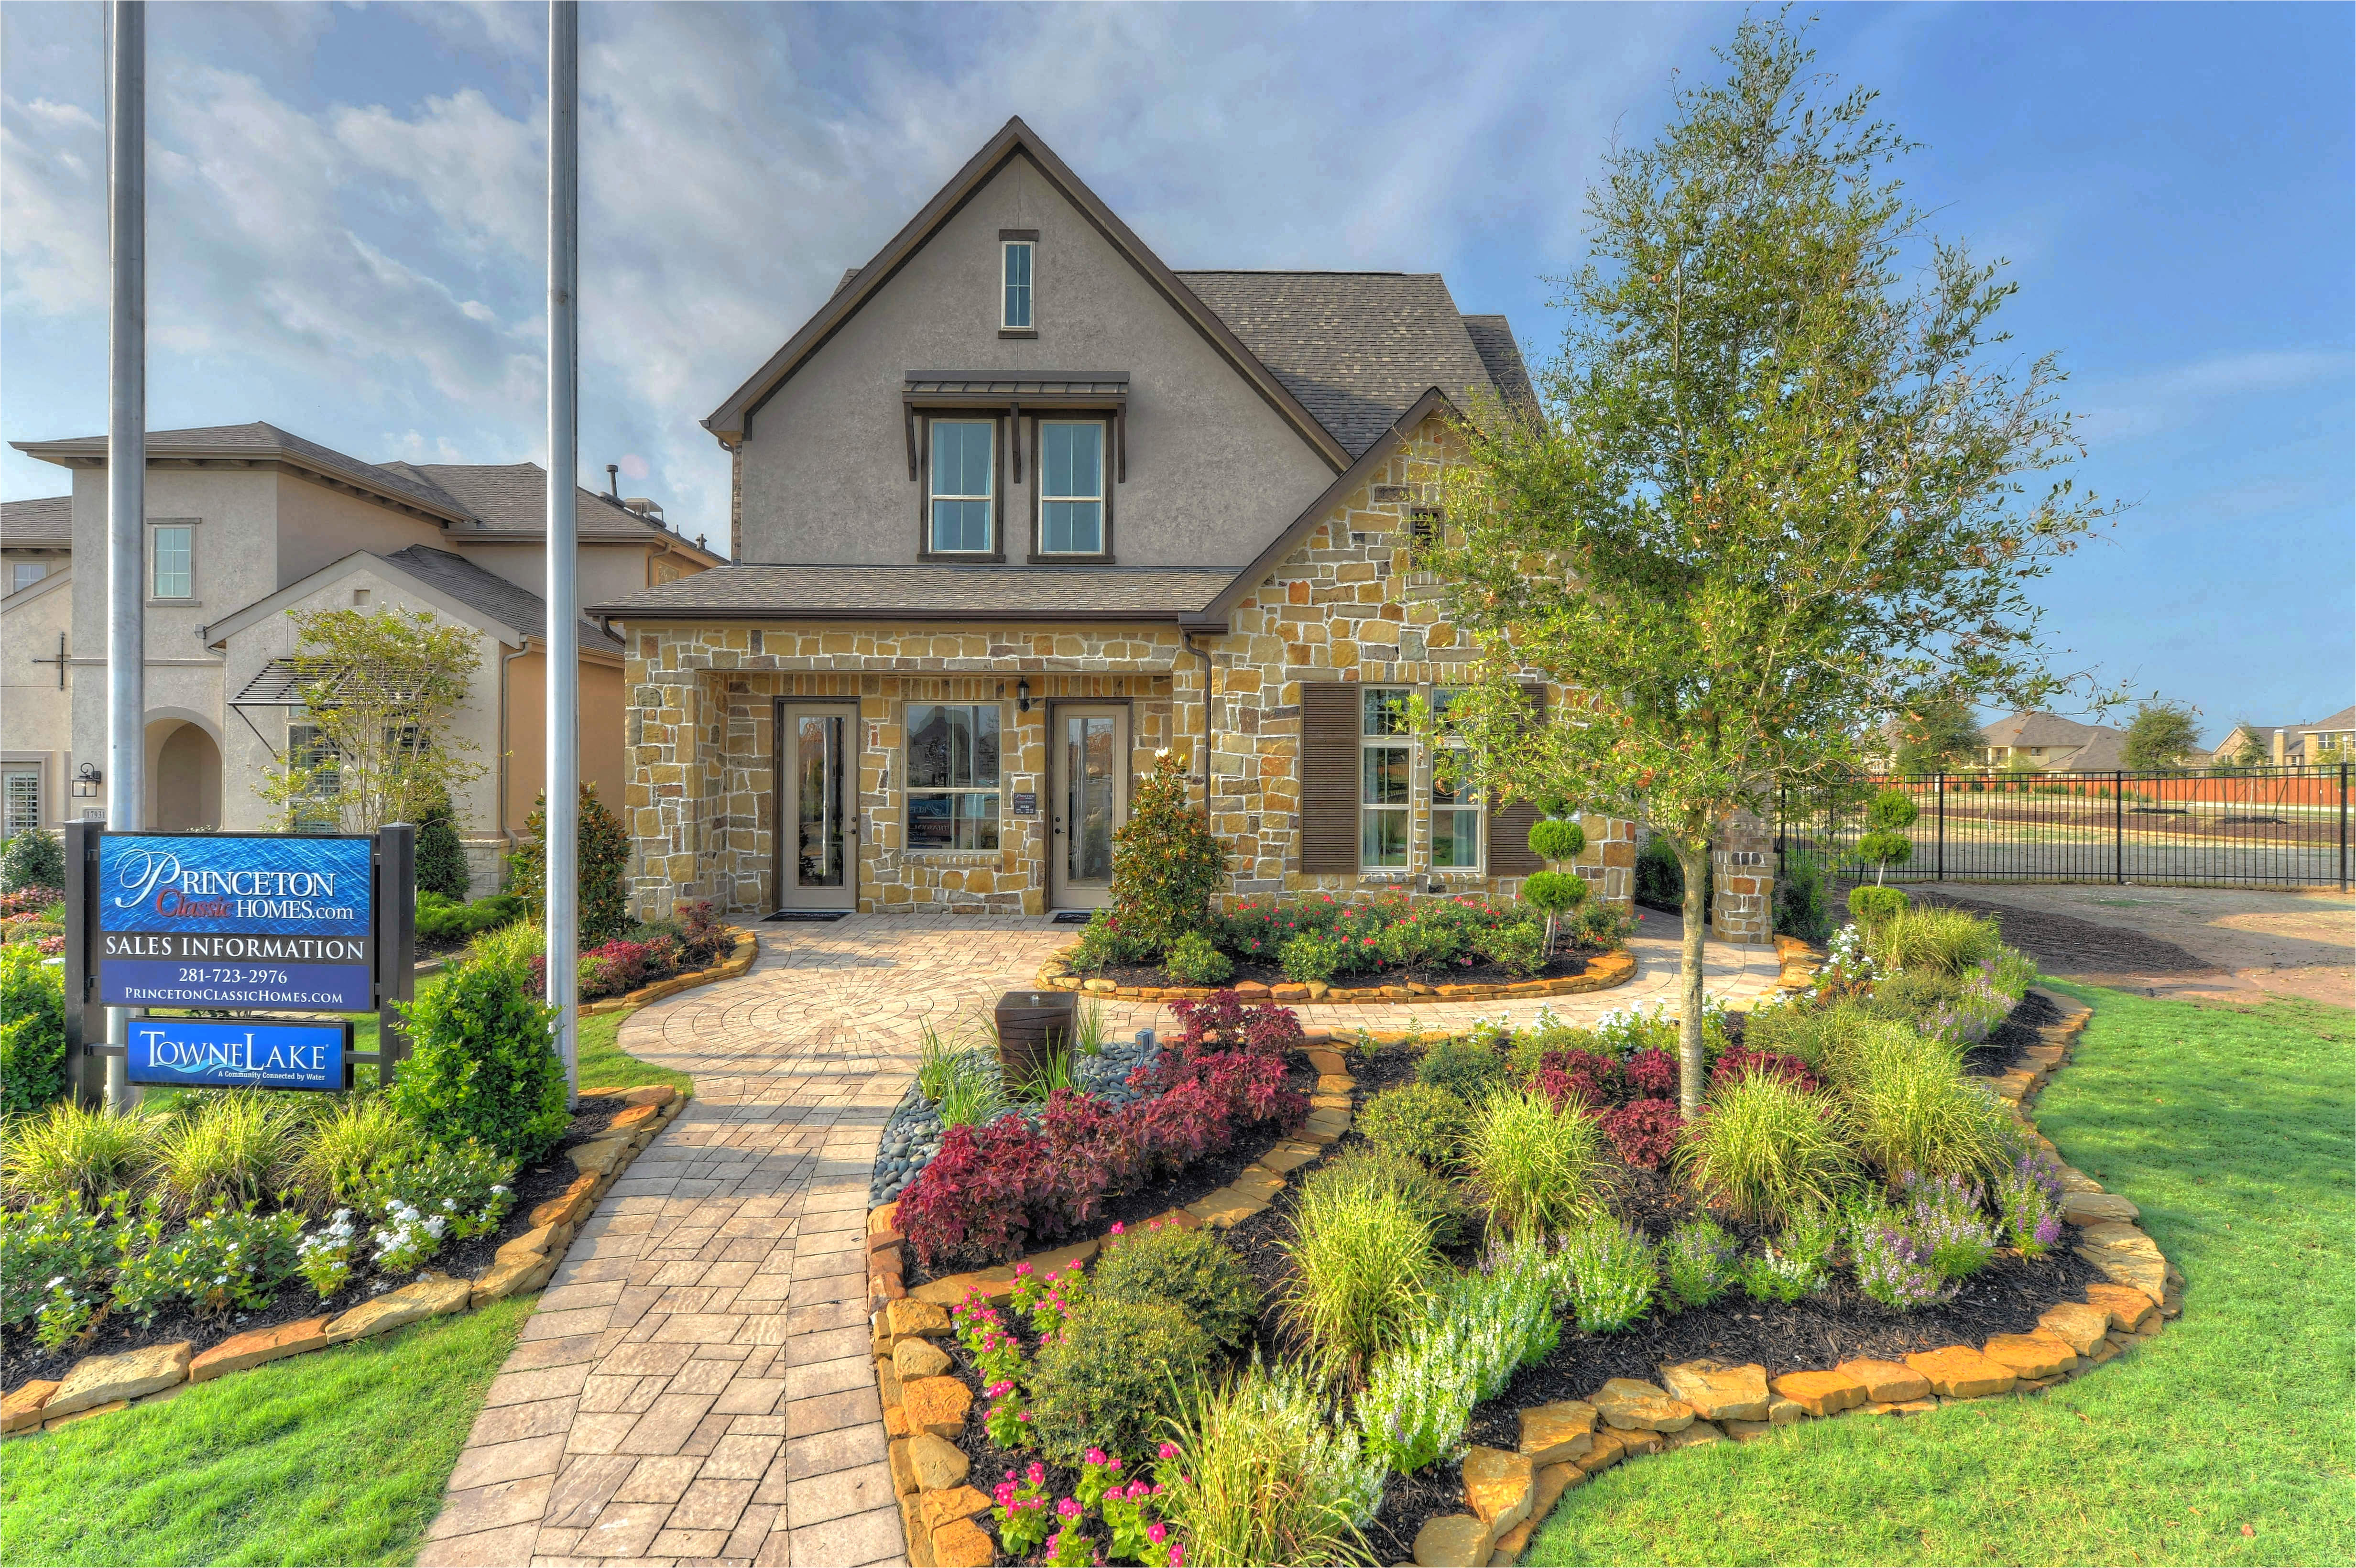 towne lake in cypress tx new homes floor plans by princeton classic homes